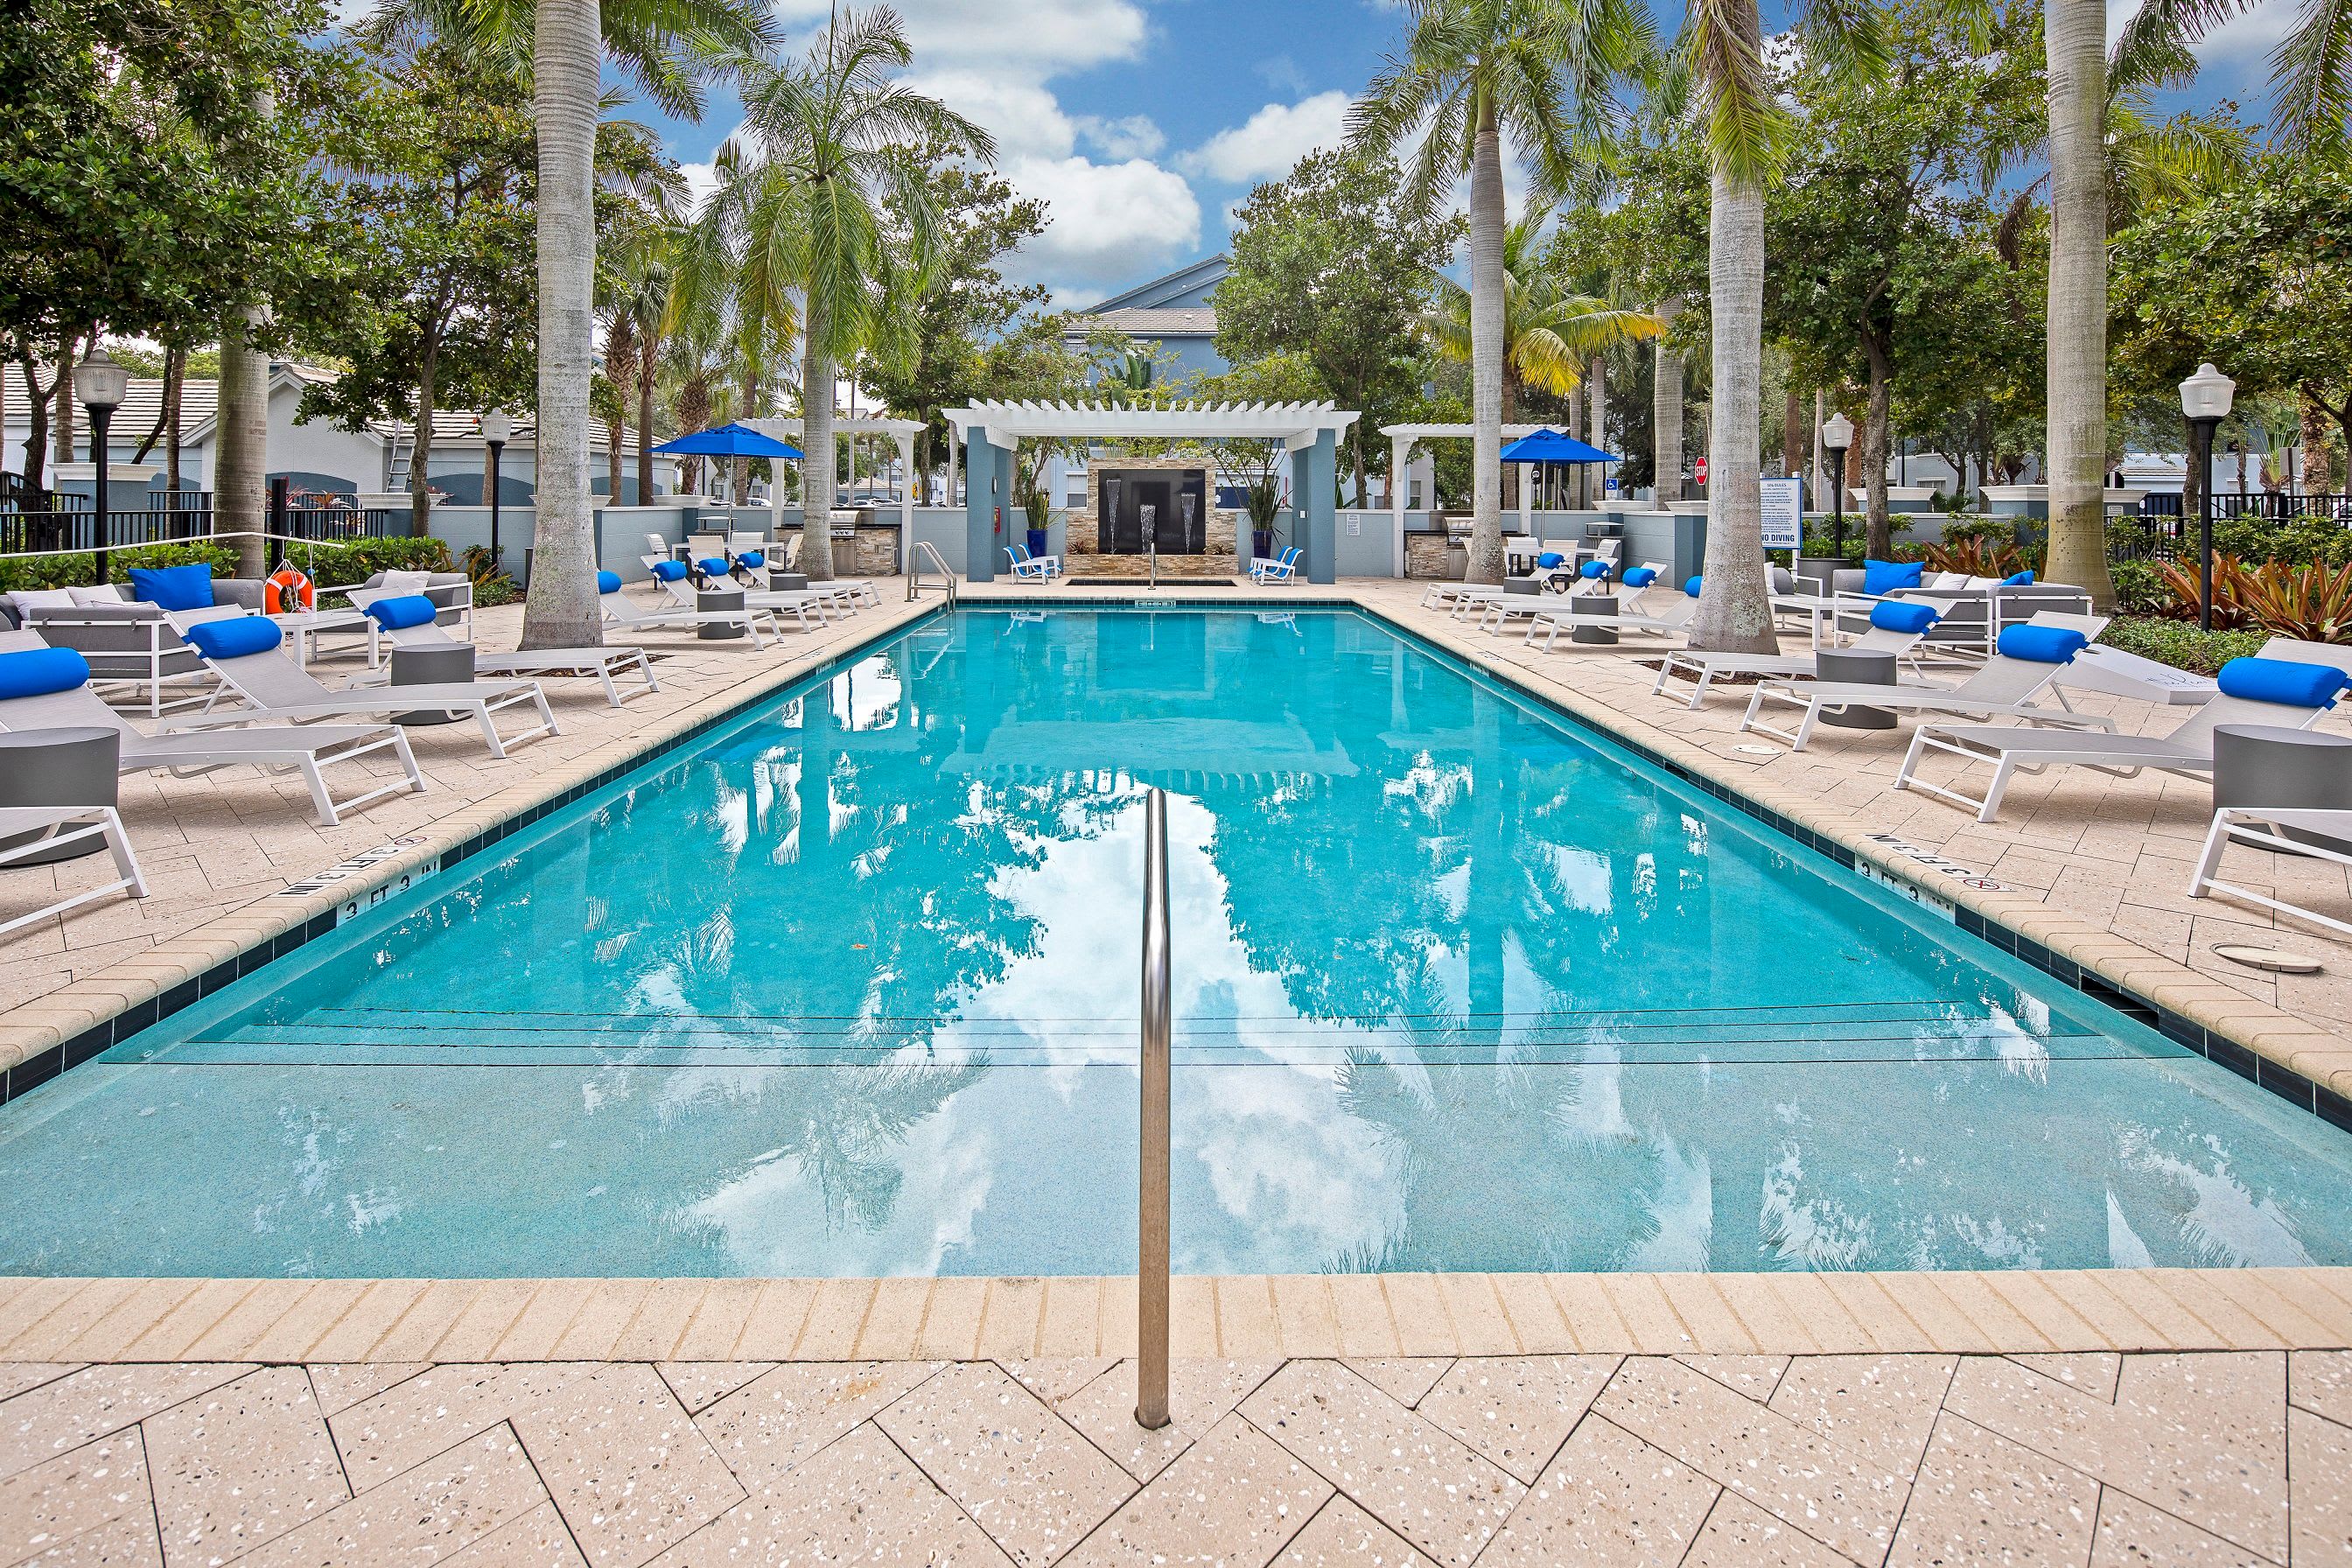 Map and directions to The Pearl in Ft Lauderdale, Florida